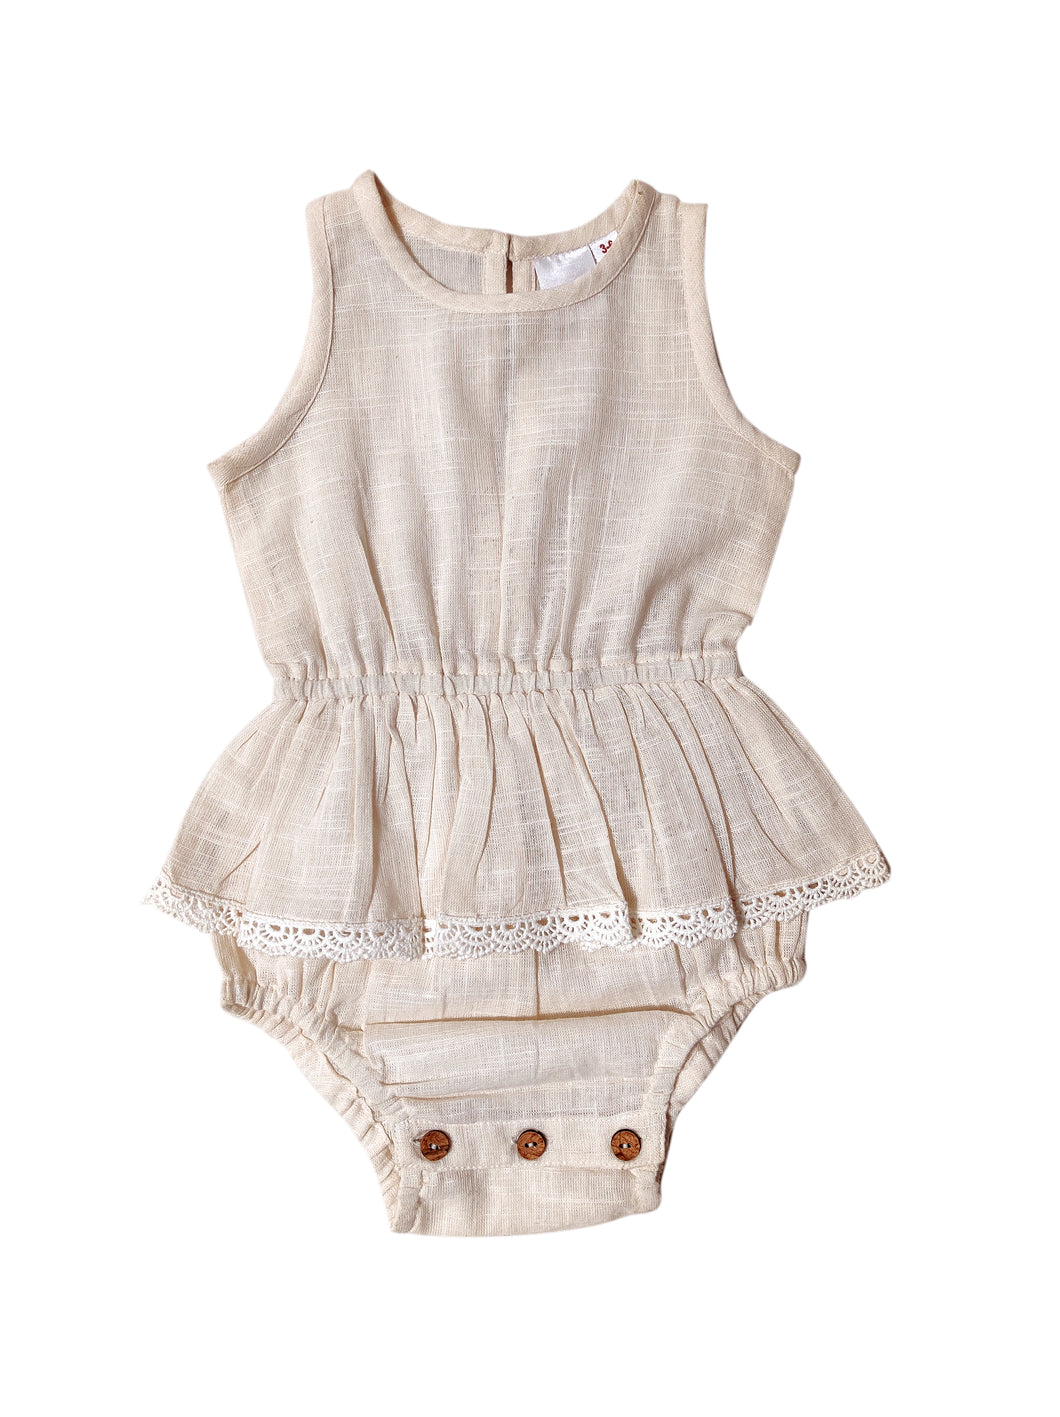 Ecru Tone on Tone Lace and Frill Detail Infant Romper